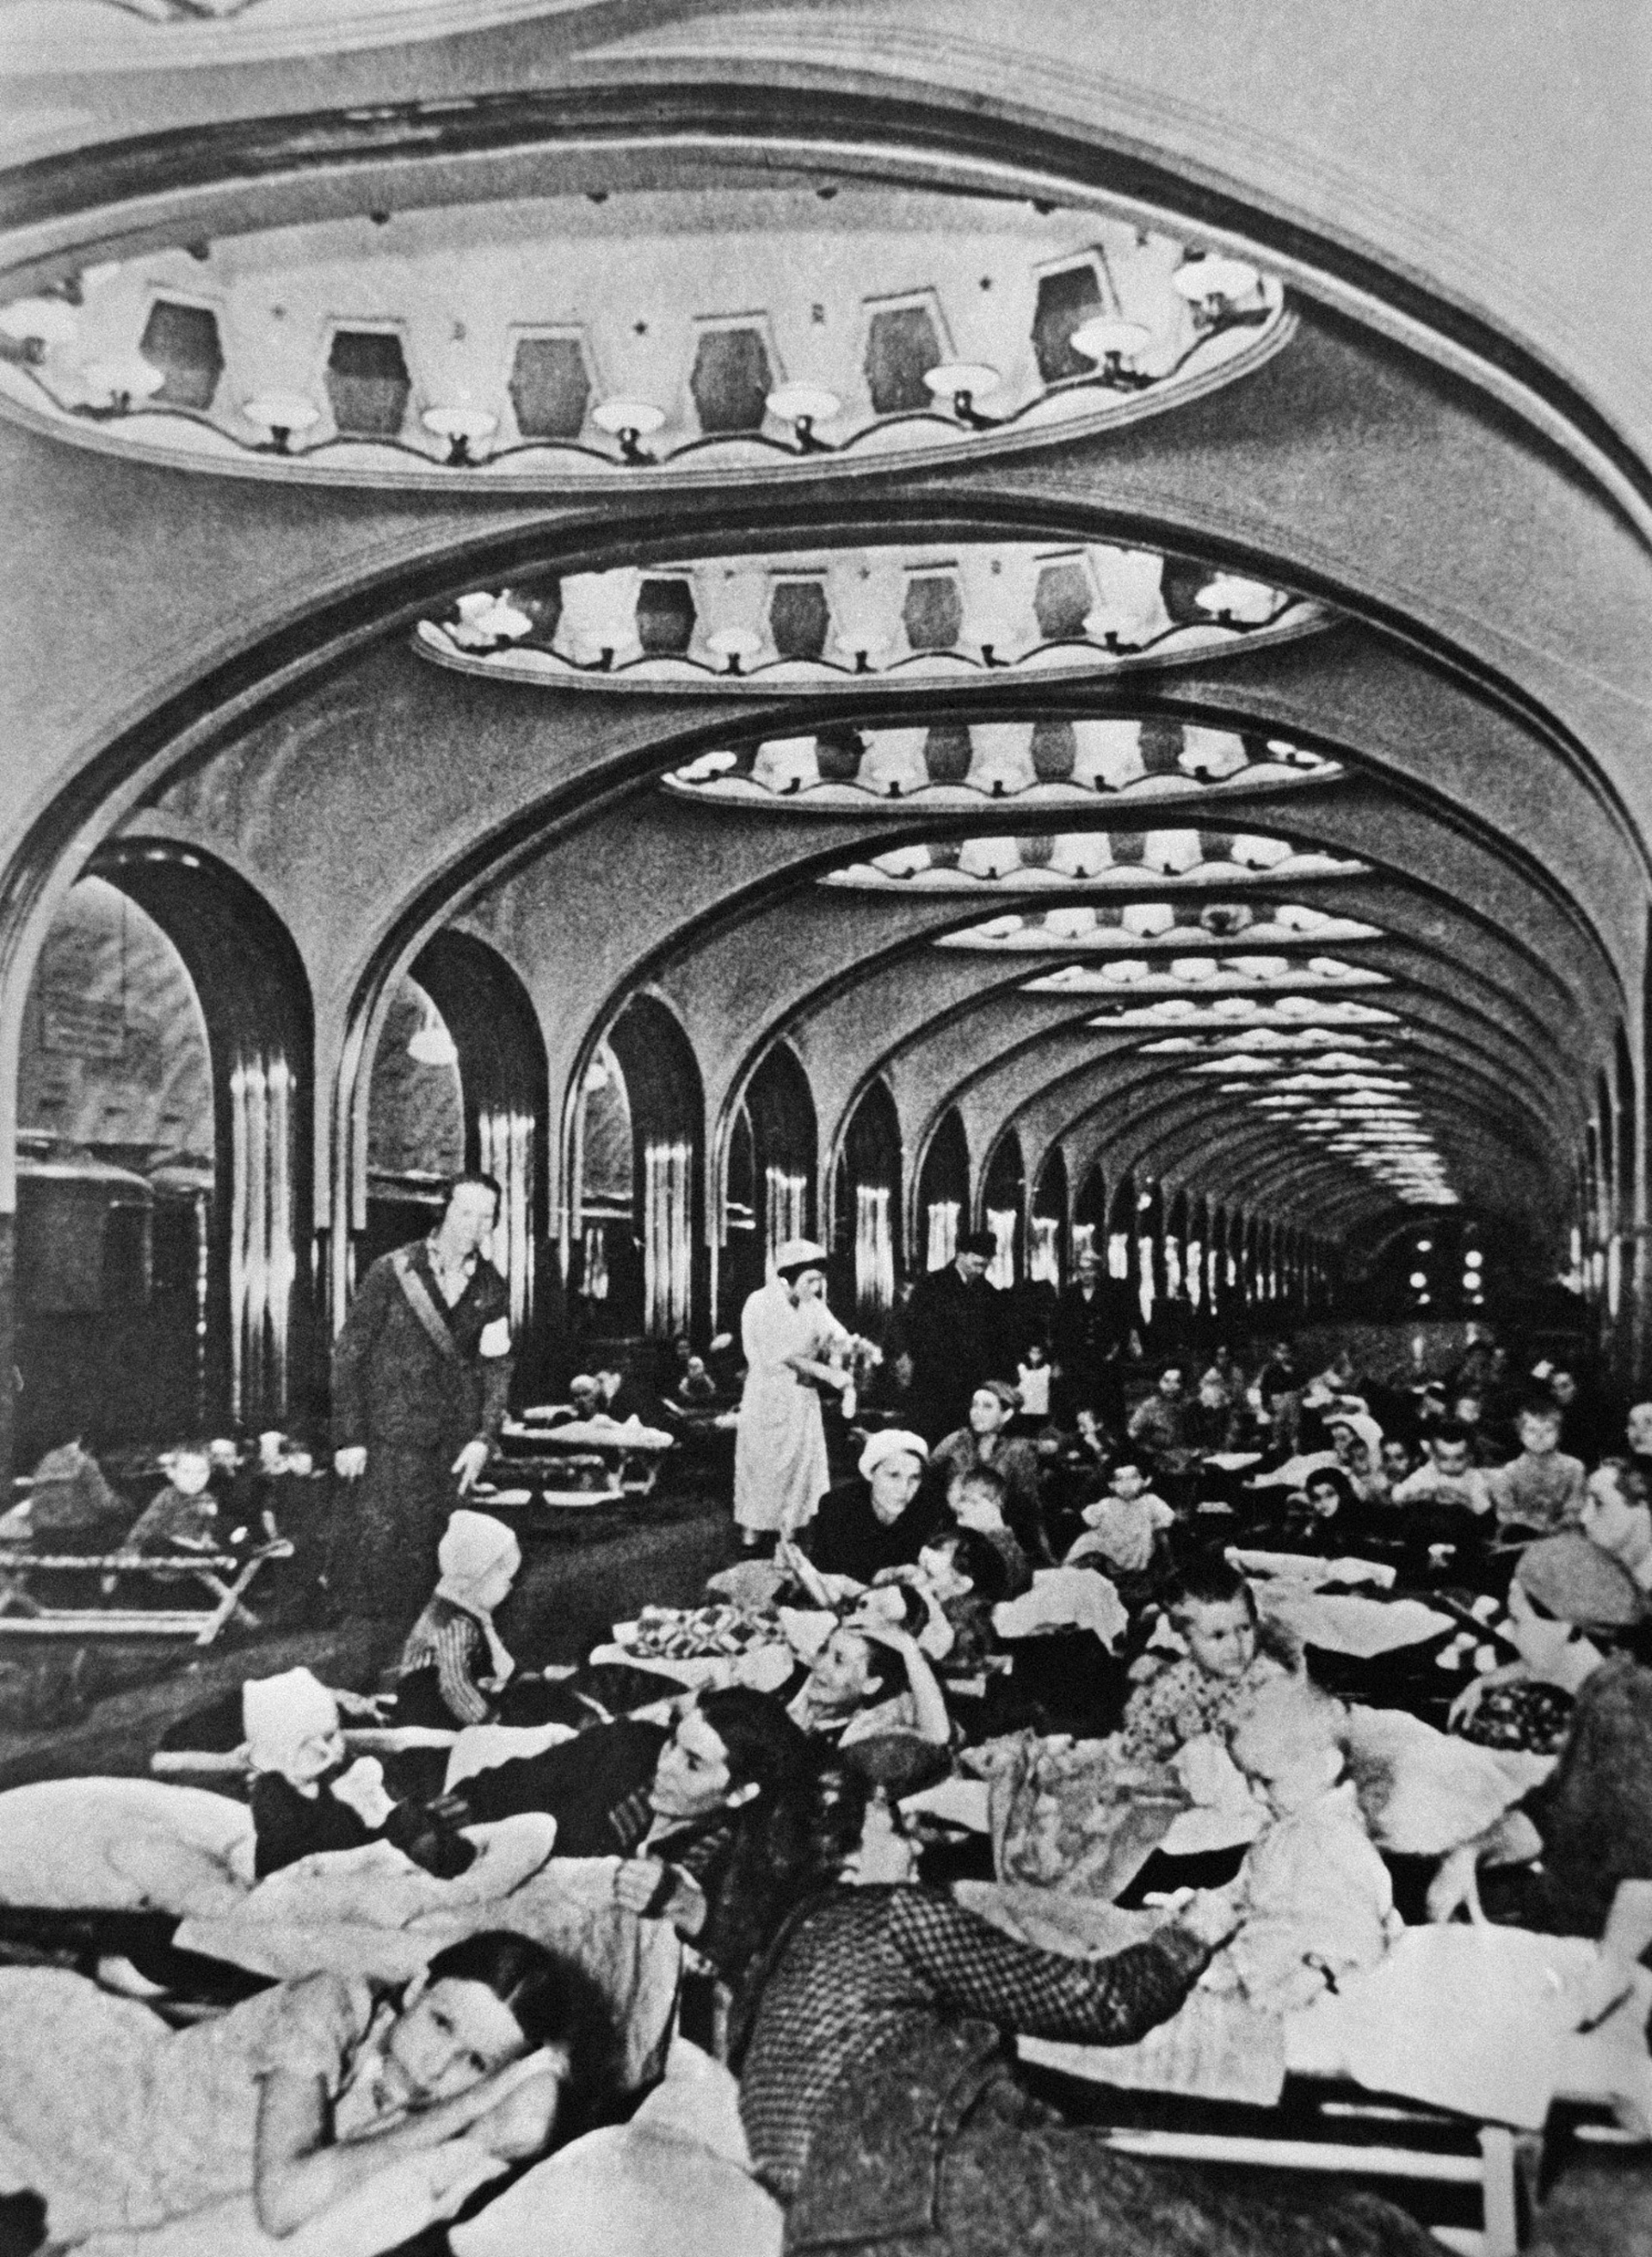 Mayakovskaya Station Was Used as a Bomb Shelter in WWII